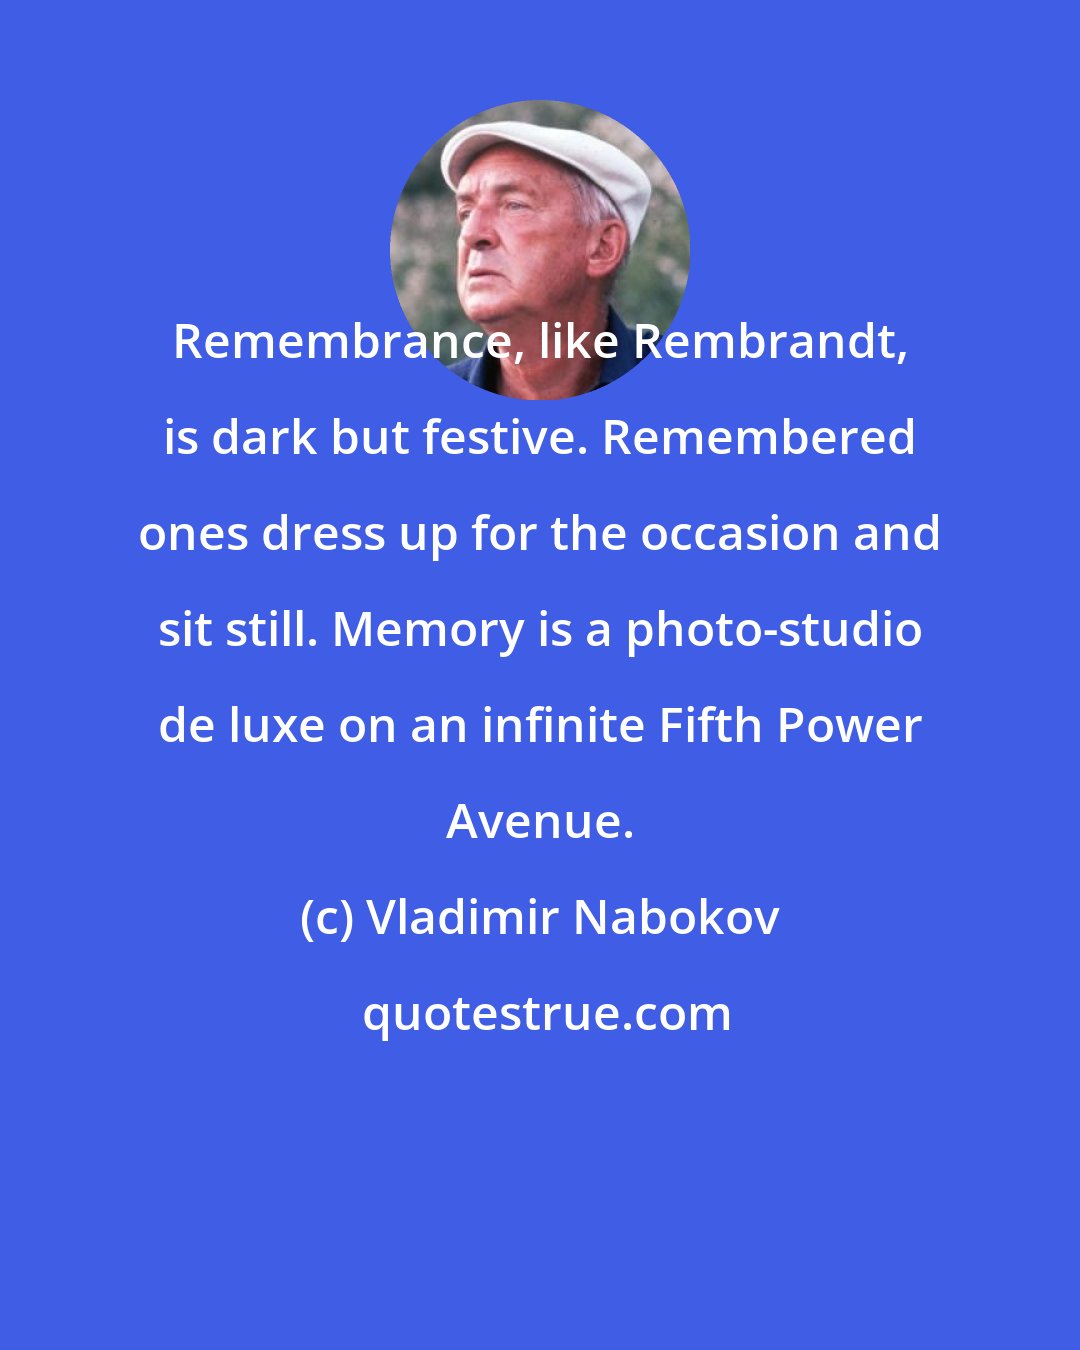 Vladimir Nabokov: Remembrance, like Rembrandt, is dark but festive. Remembered ones dress up for the occasion and sit still. Memory is a photo-studio de luxe on an infinite Fifth Power Avenue.